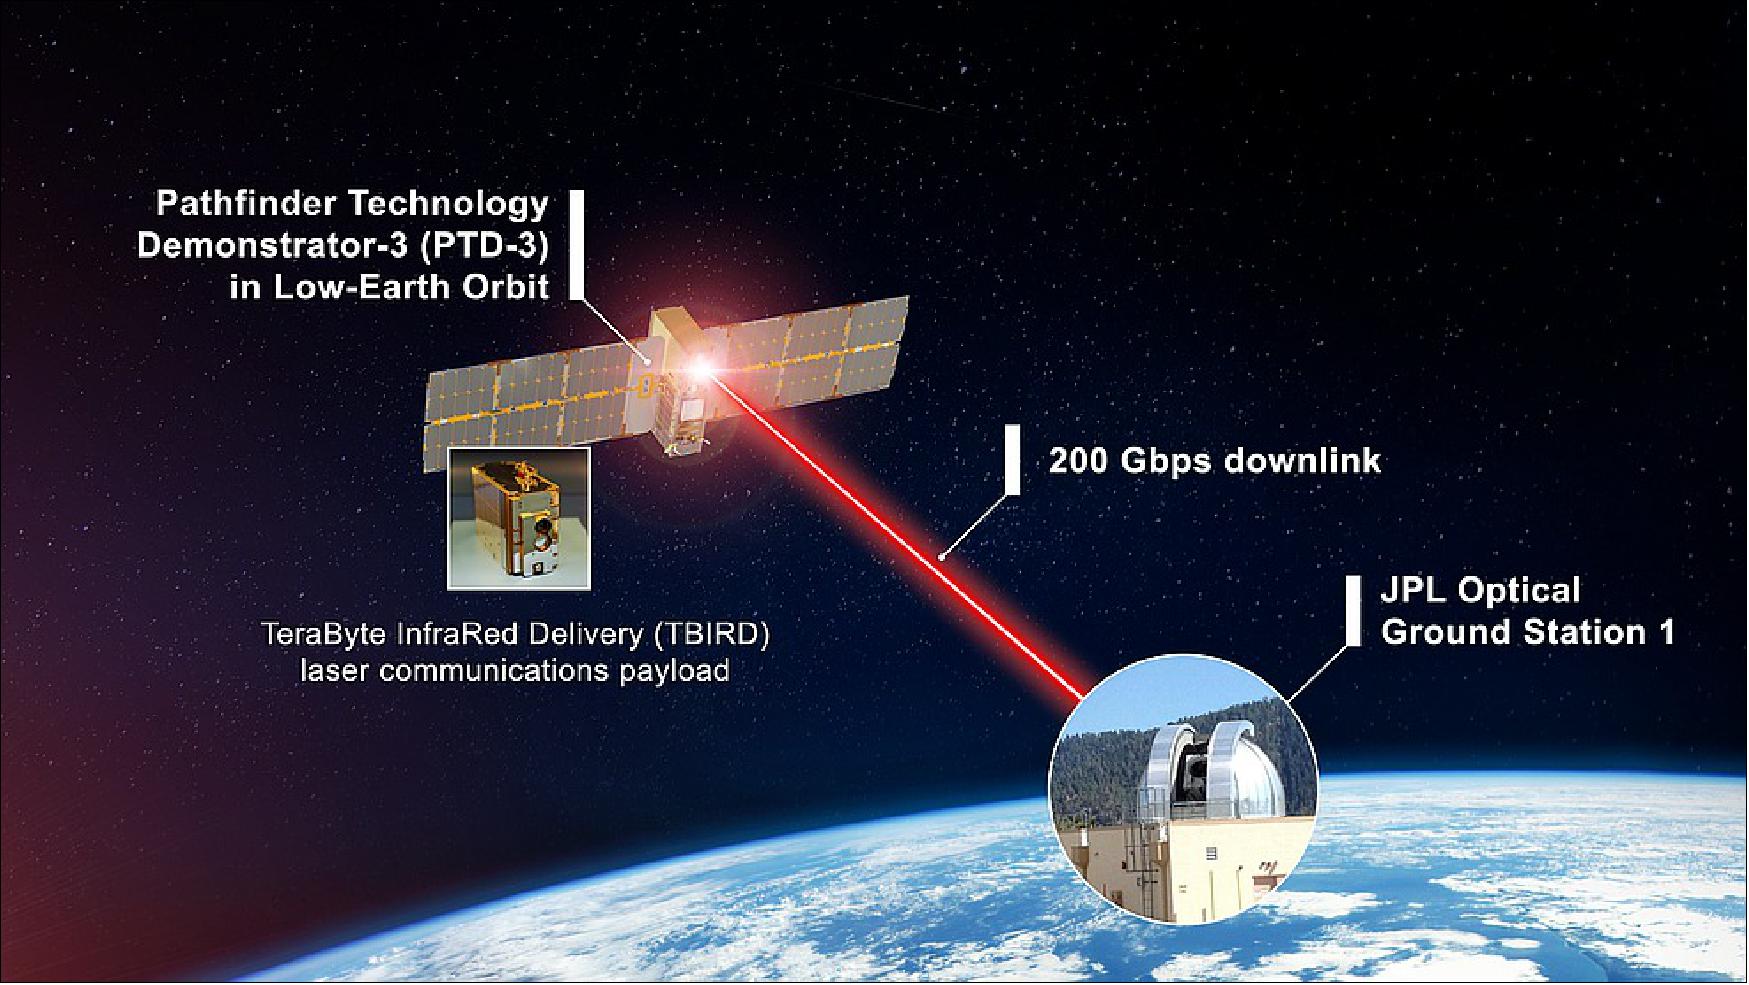 Figure 1: Illustration of TBIRD downlinking data over lasers links to Optical Ground Station 1 in California. (Not drawn to scale), image credits: NASA/Dave Ryan